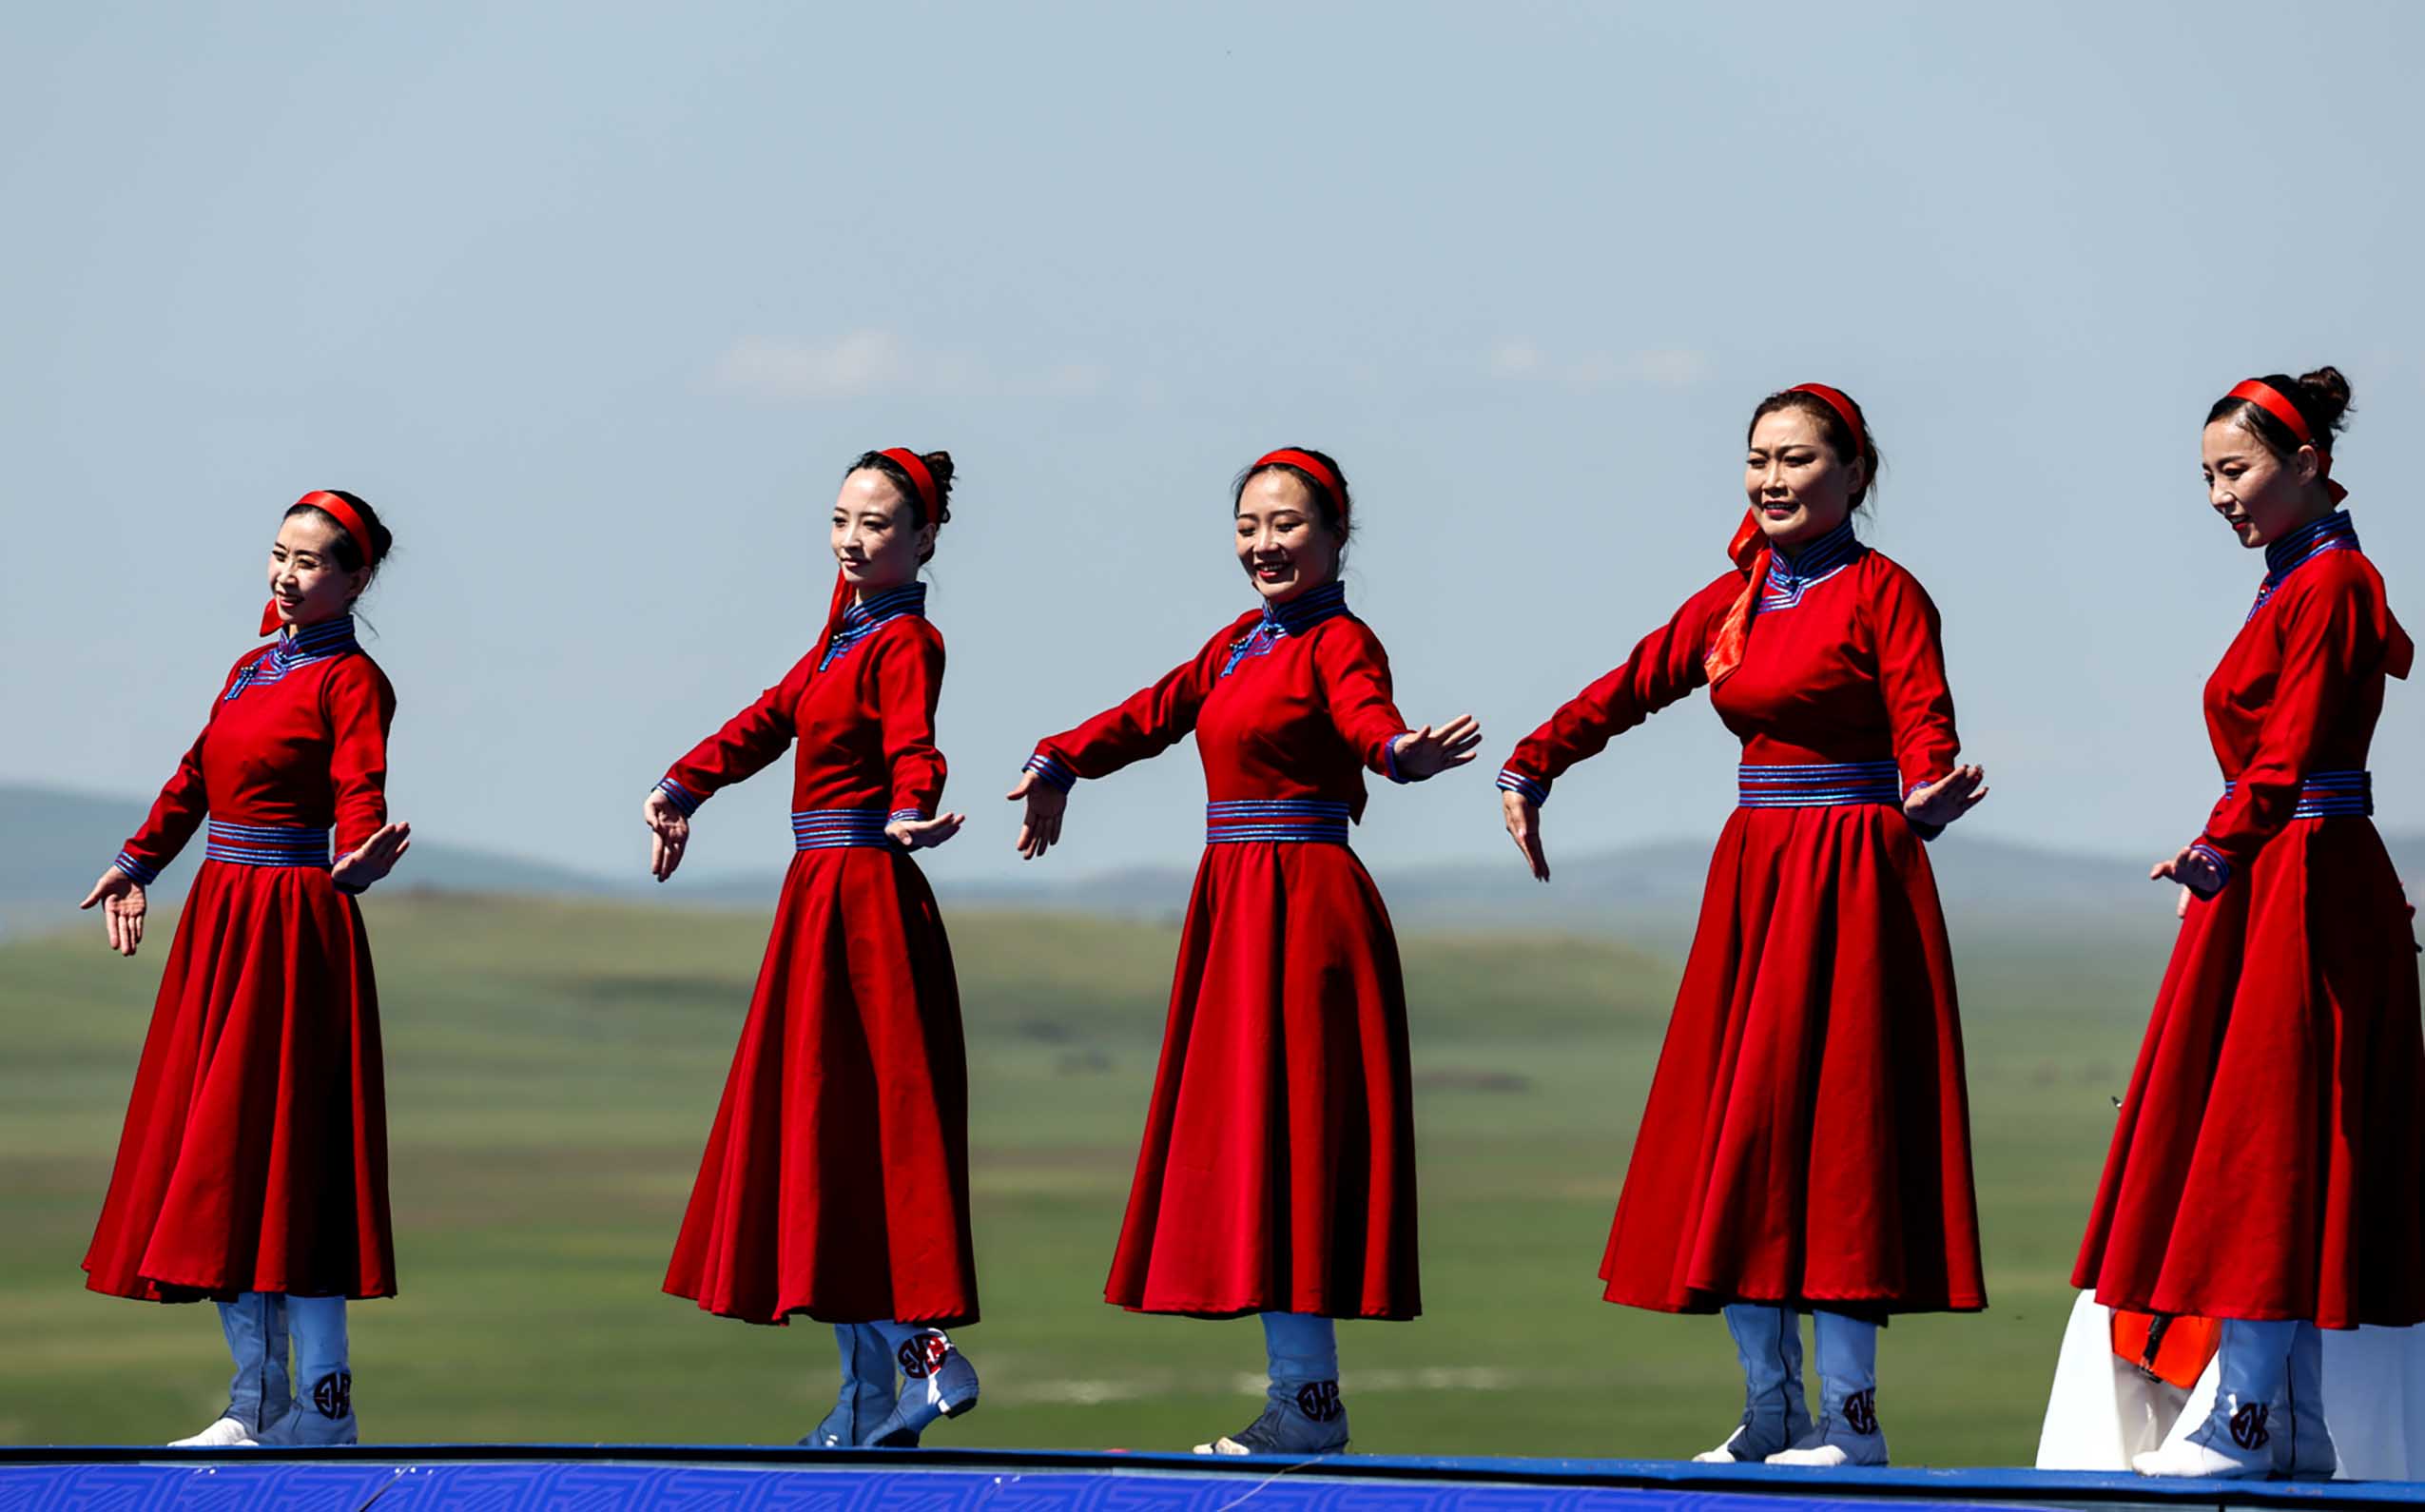 Actors perform during the second edition of the Hulun Buir grassland culture and tourism festival in Hulun Buir, north China's Inner Mongolia Autonomous Region, July 1, 2023. The second edition of the Hulun Buir grassland culture and tourism festival kicked off here on Saturday, attracting nationwide tourists with various performances of folk culture. (Xinhua/Lan Hongguang)